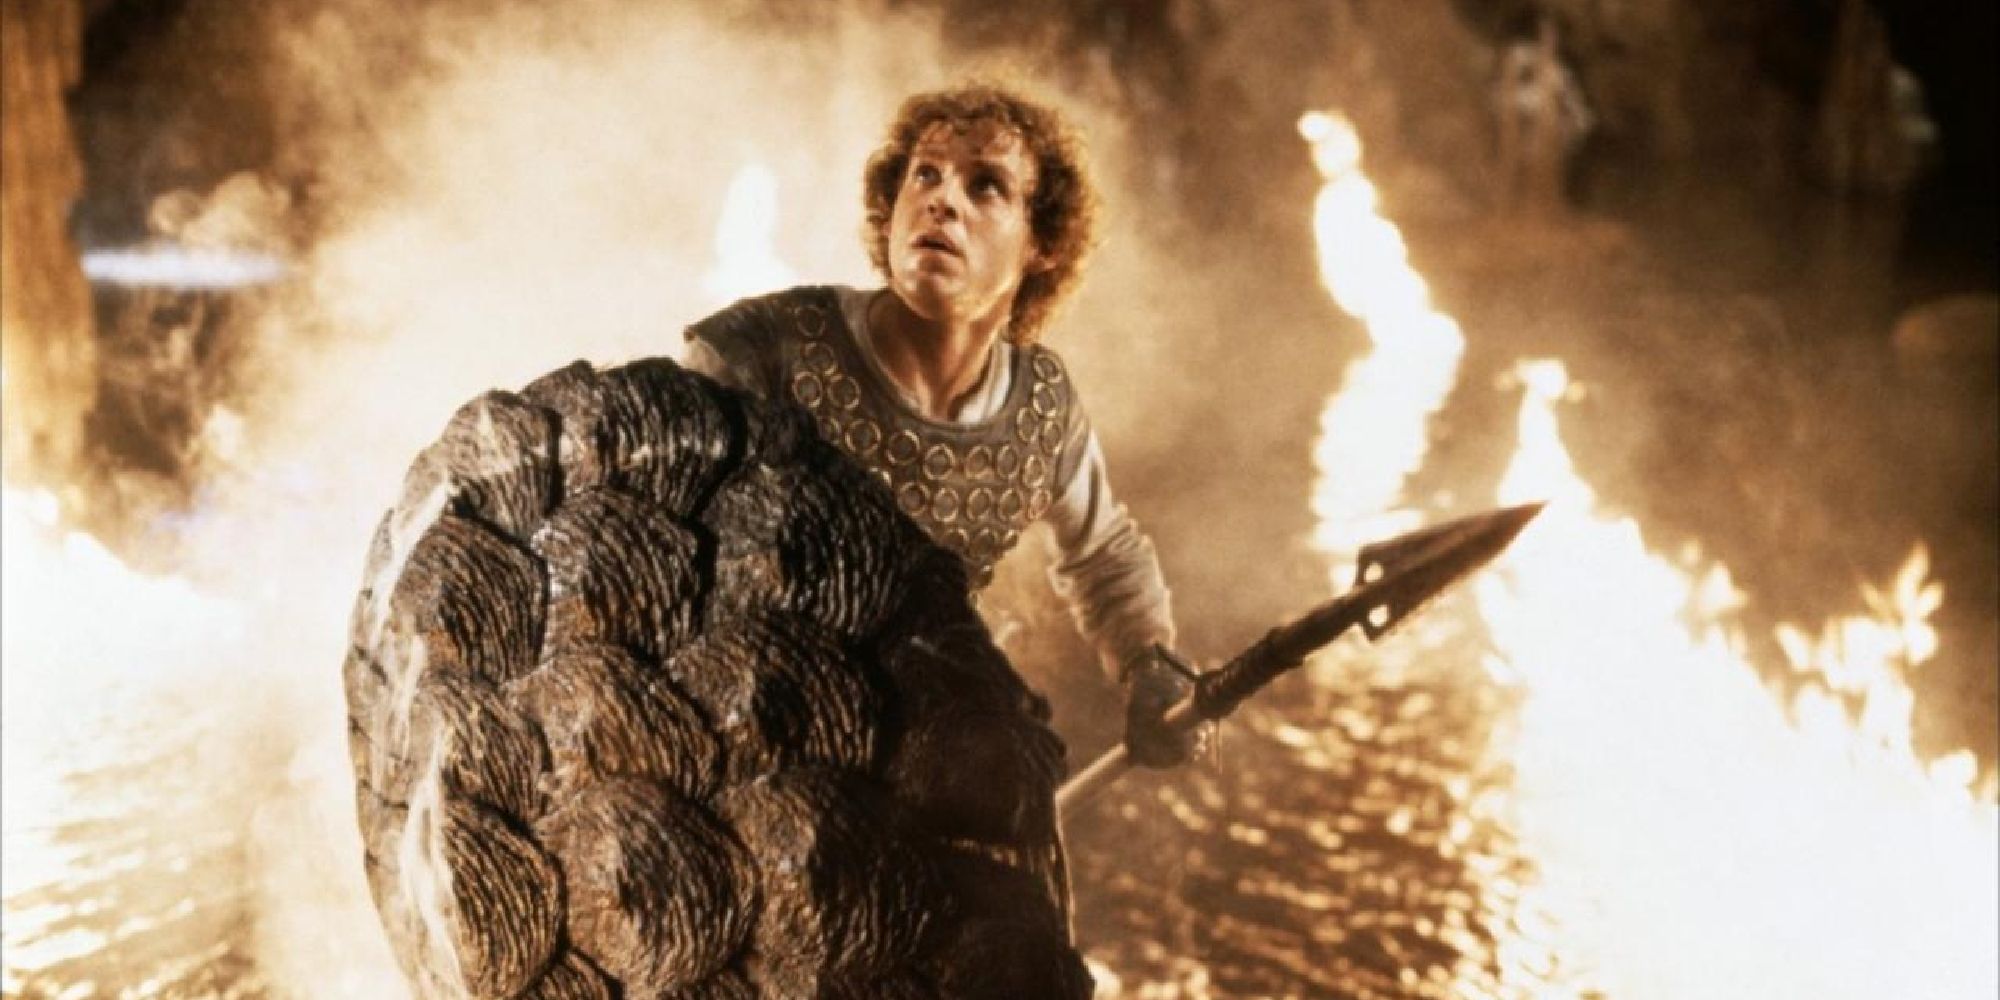 Peter MacNicol carrying a spear and shield surrounded by fire in Dragonslayer